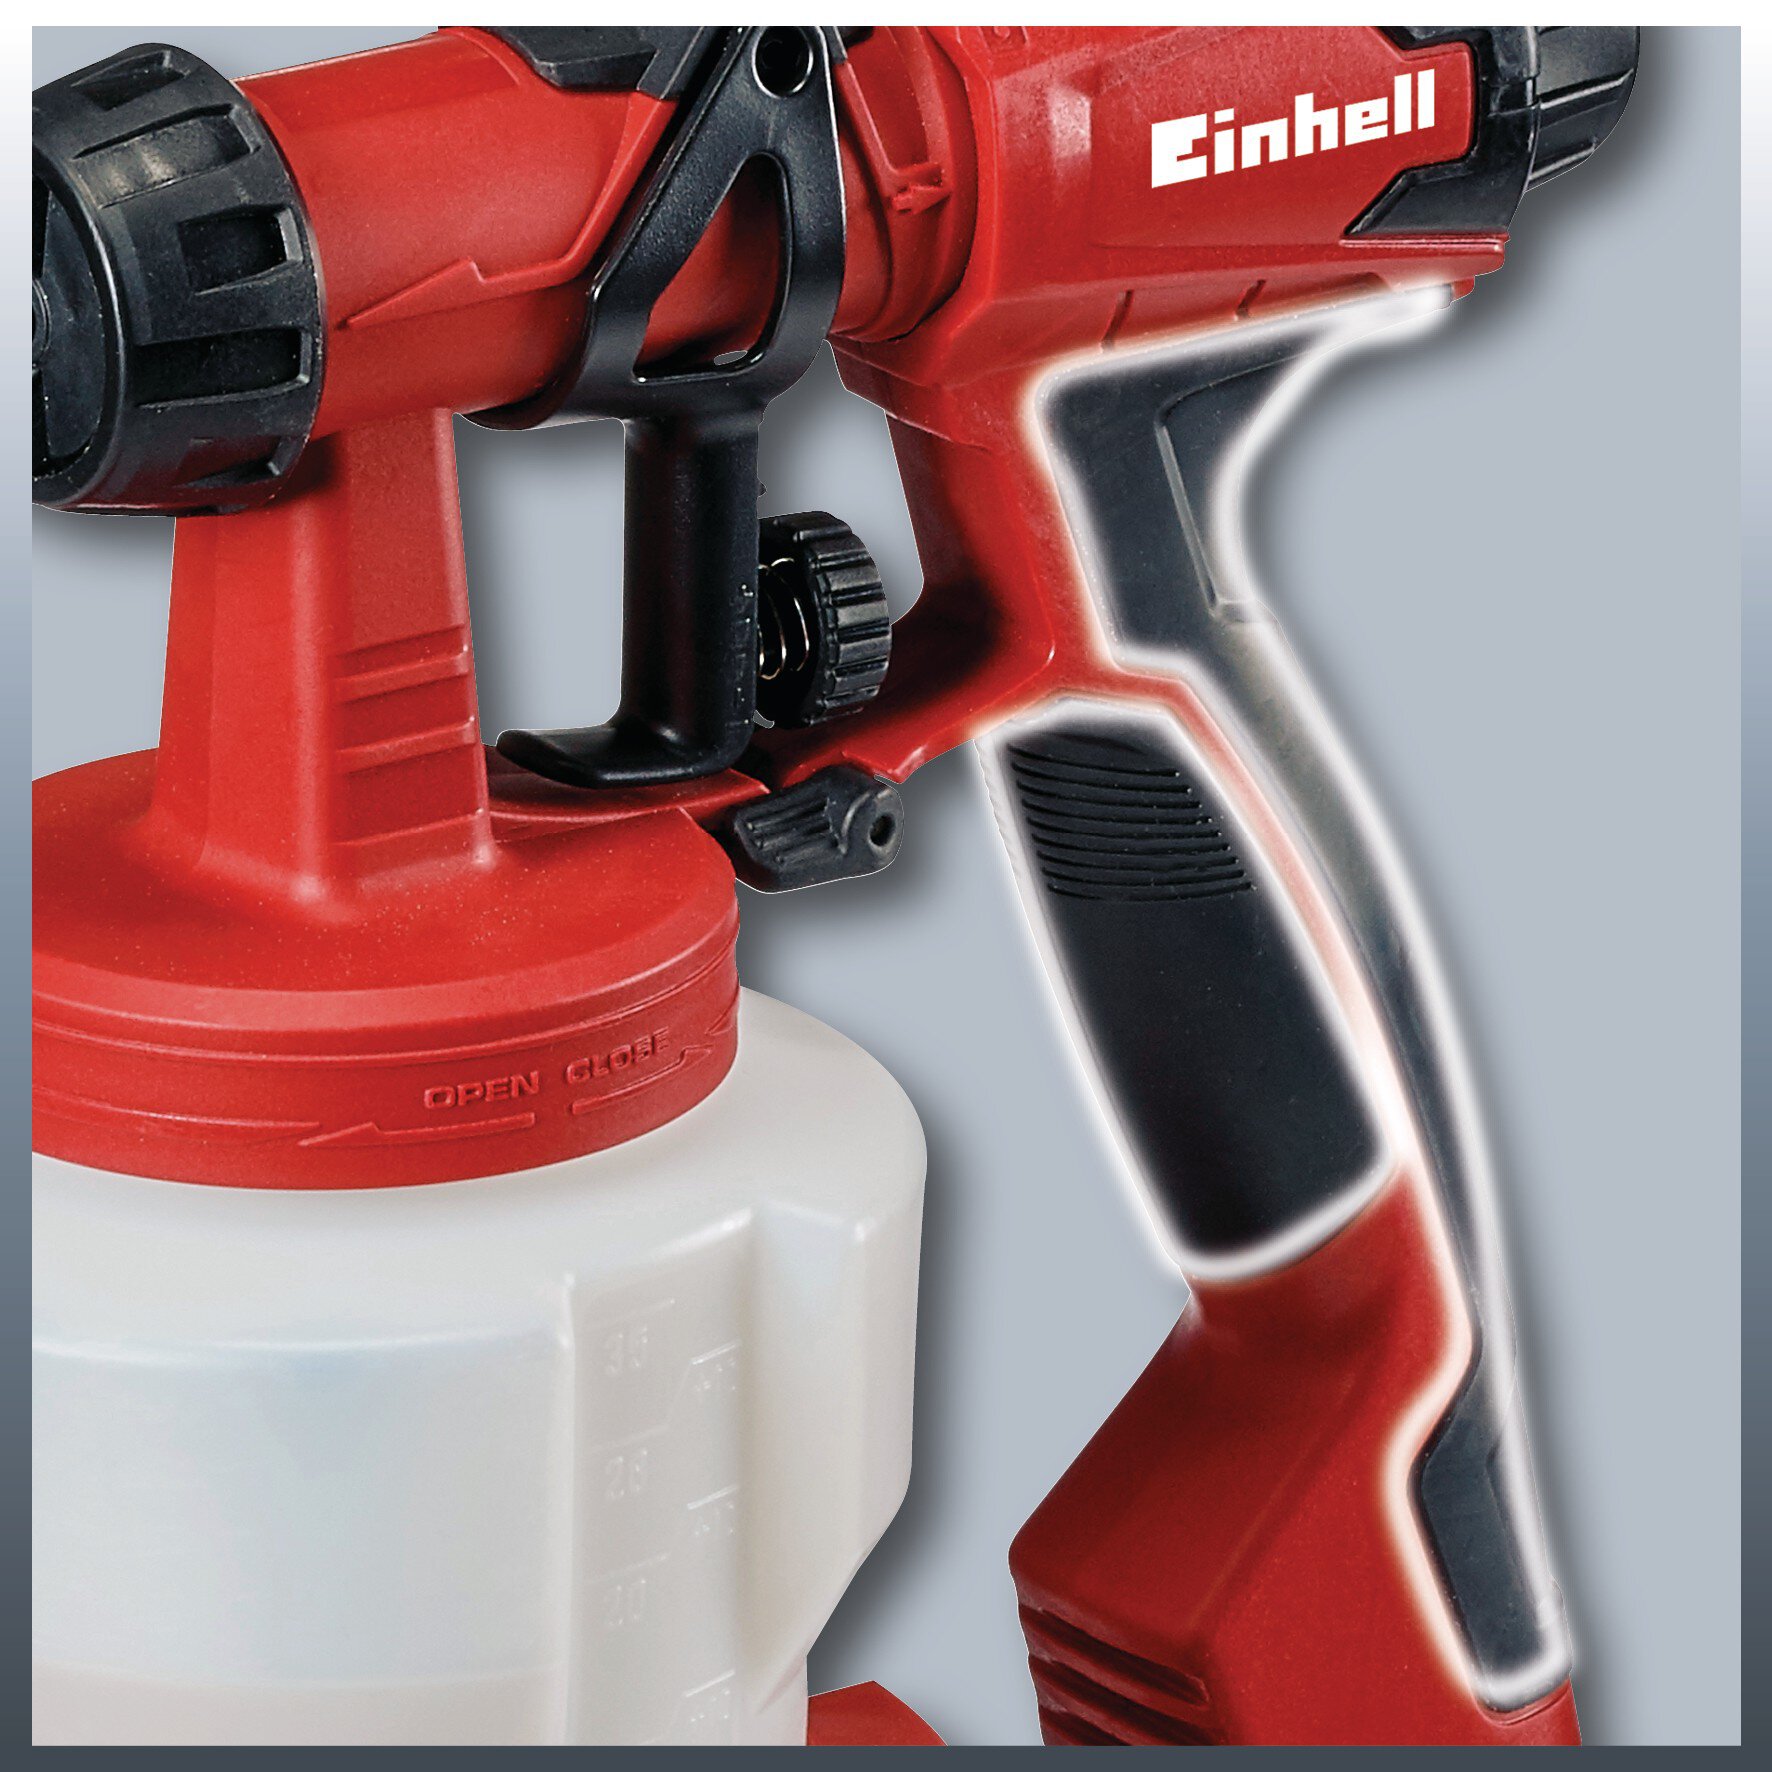 einhell-classic-paint-spray-system-4260020-detail_image-004